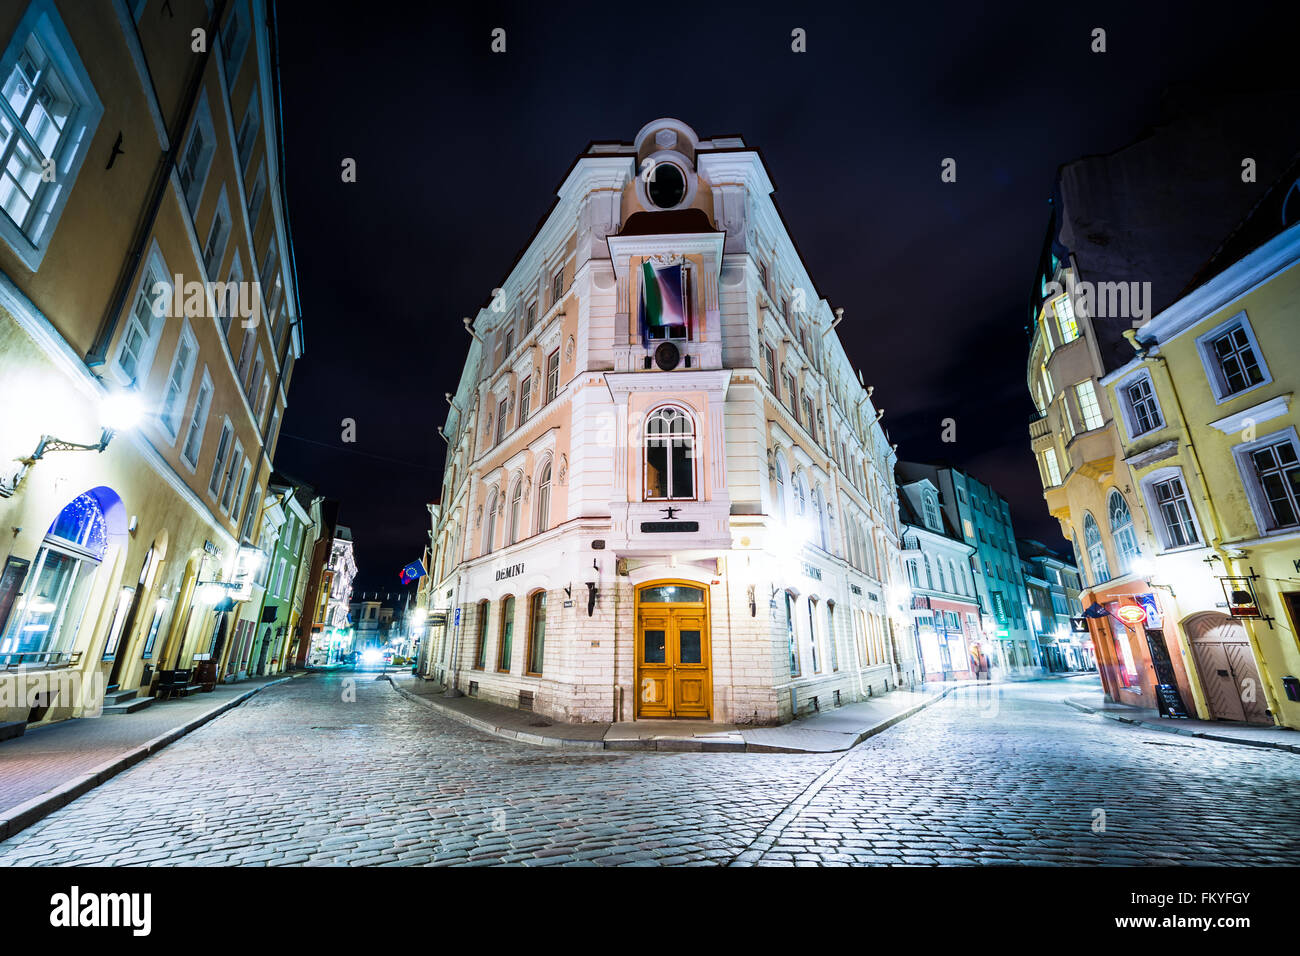 Buildings and cobblestone streets in the Old Town at night, in Tallinn, Estonia. Stock Photo